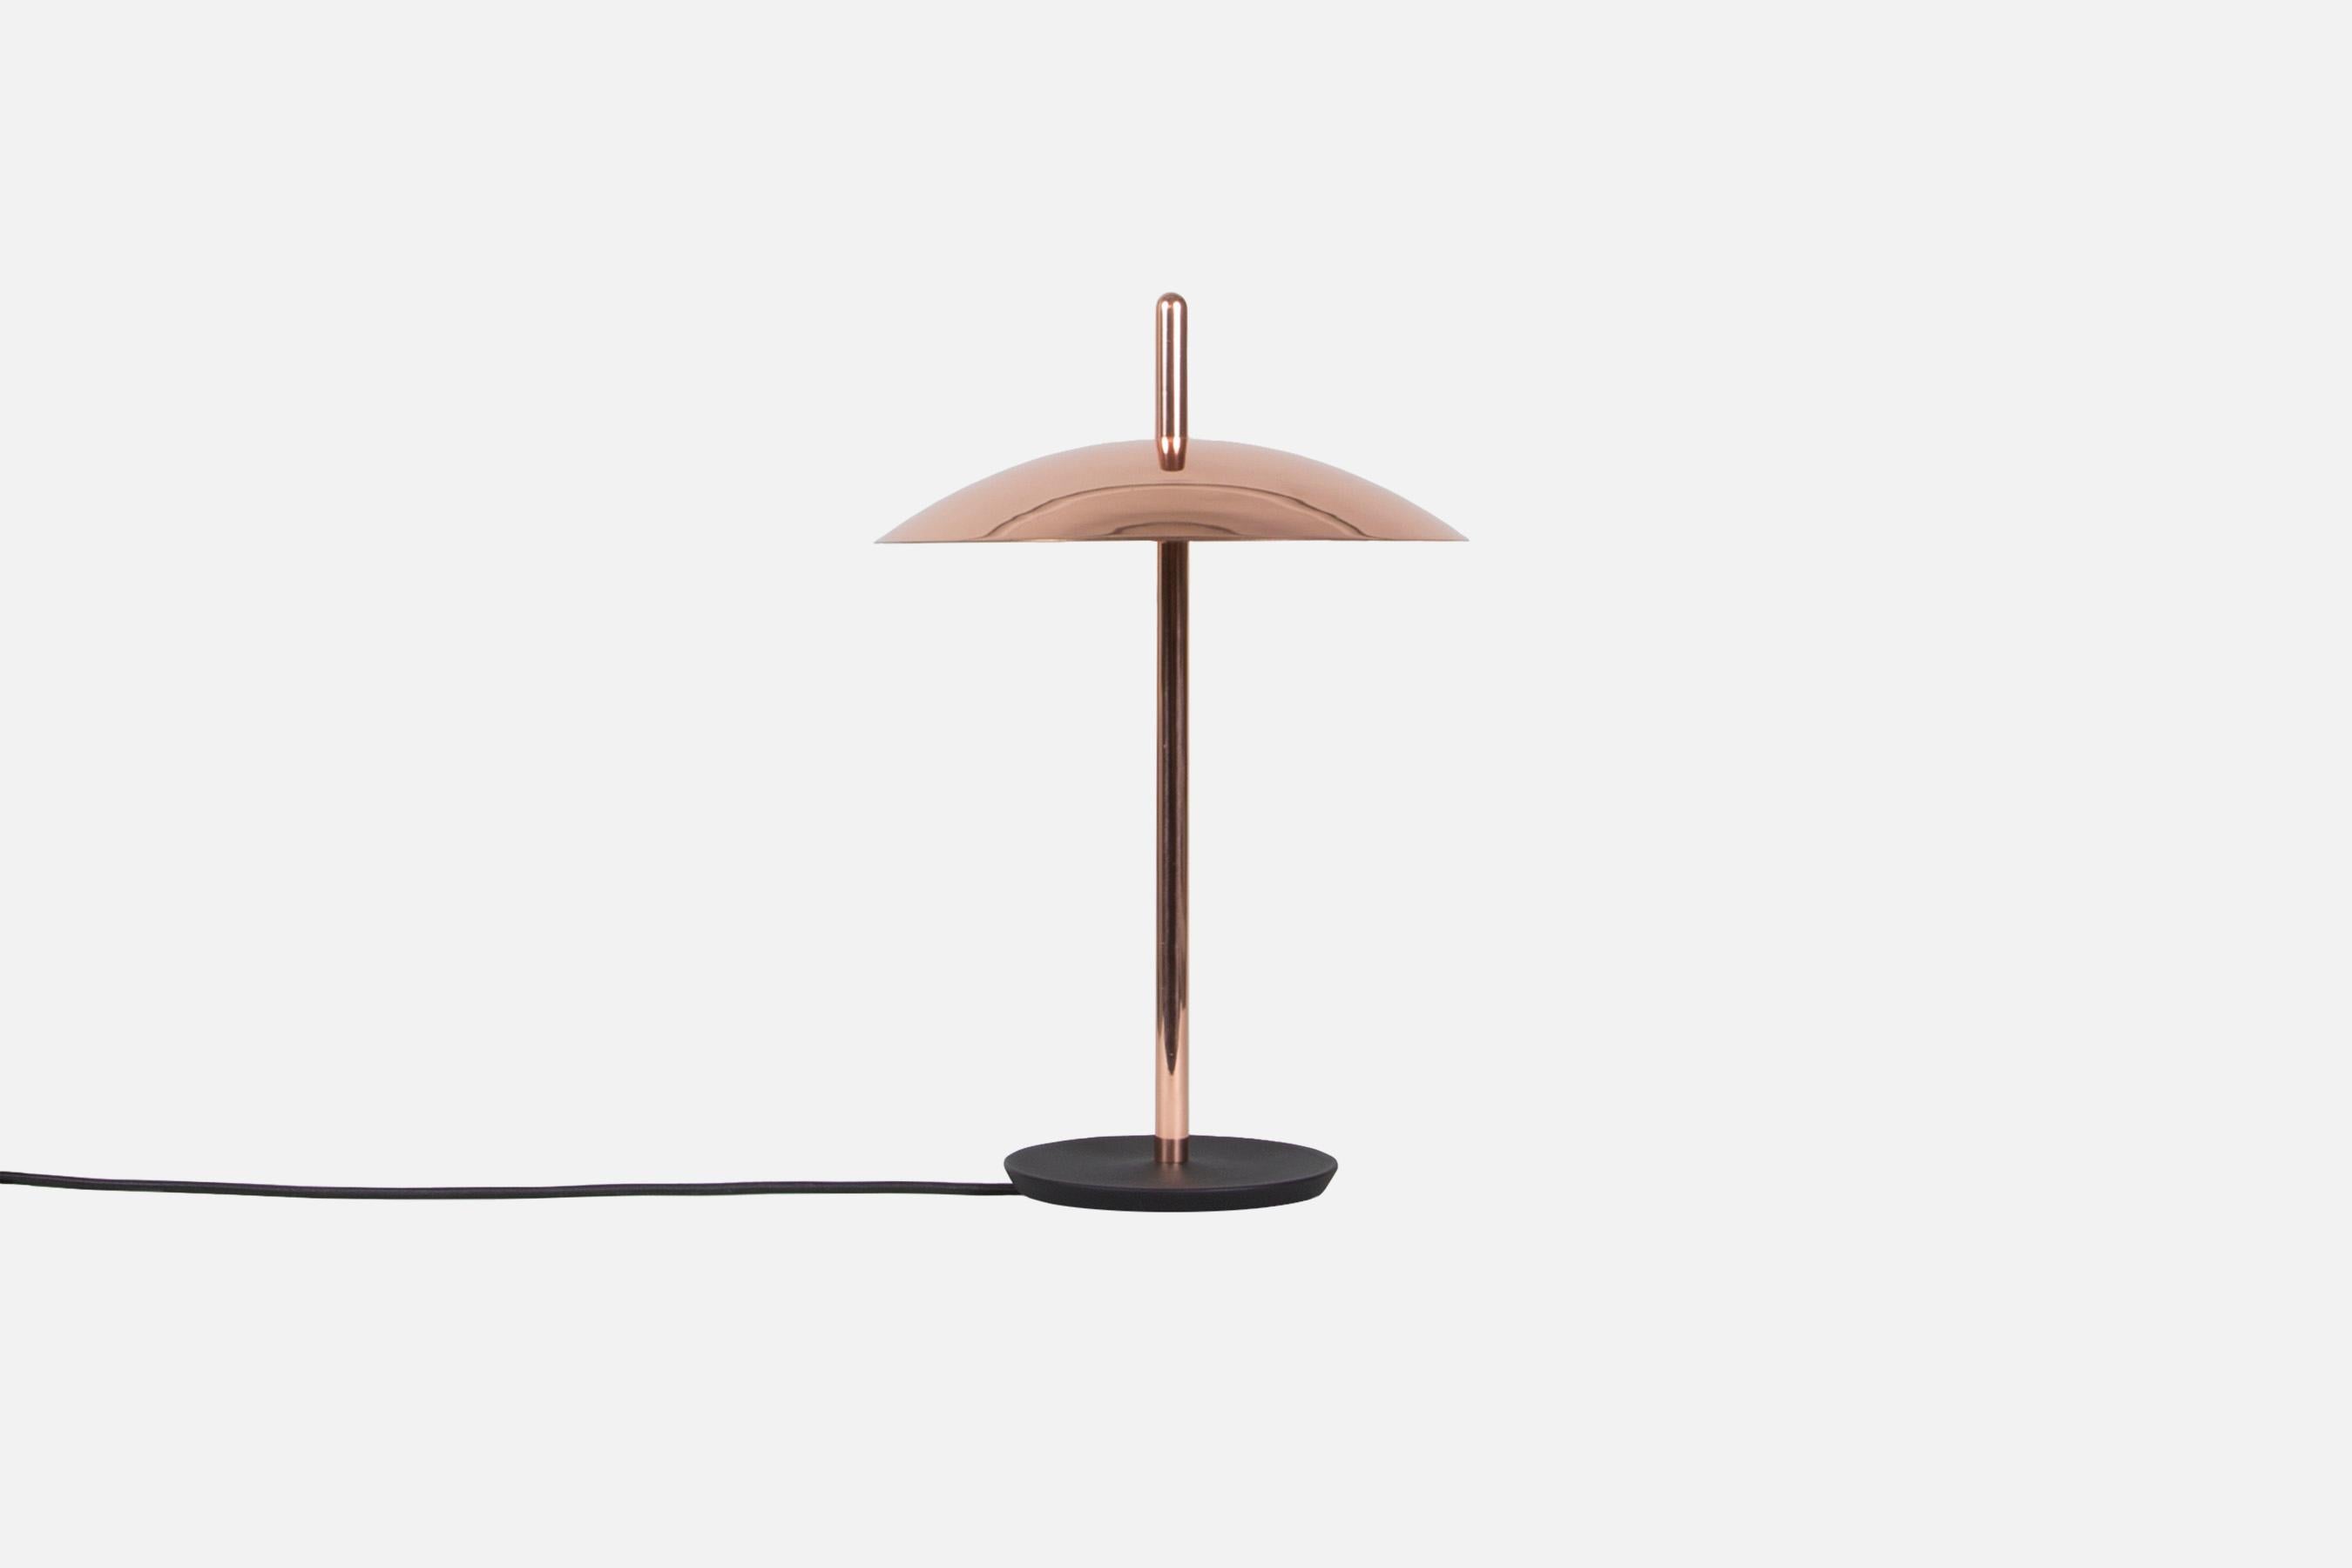 Powder-Coated Signal Table Lamp from Souda, Black & Nickel, Made to Order For Sale